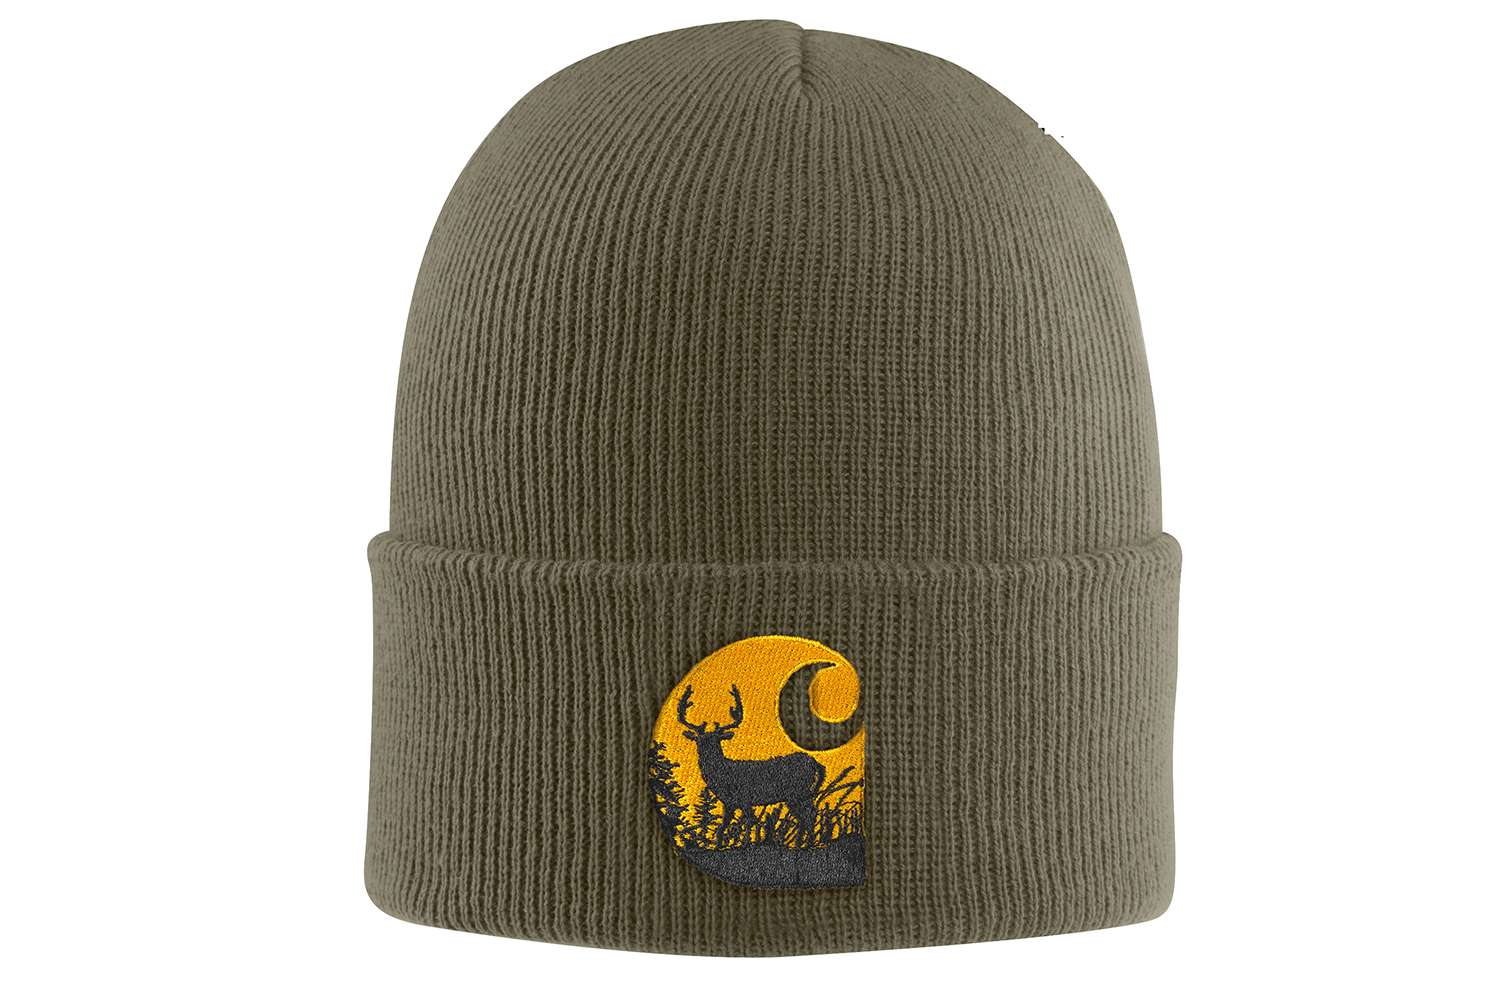 Carhartt Special Edition Hunting Acrylic Watch Hat, $14.99